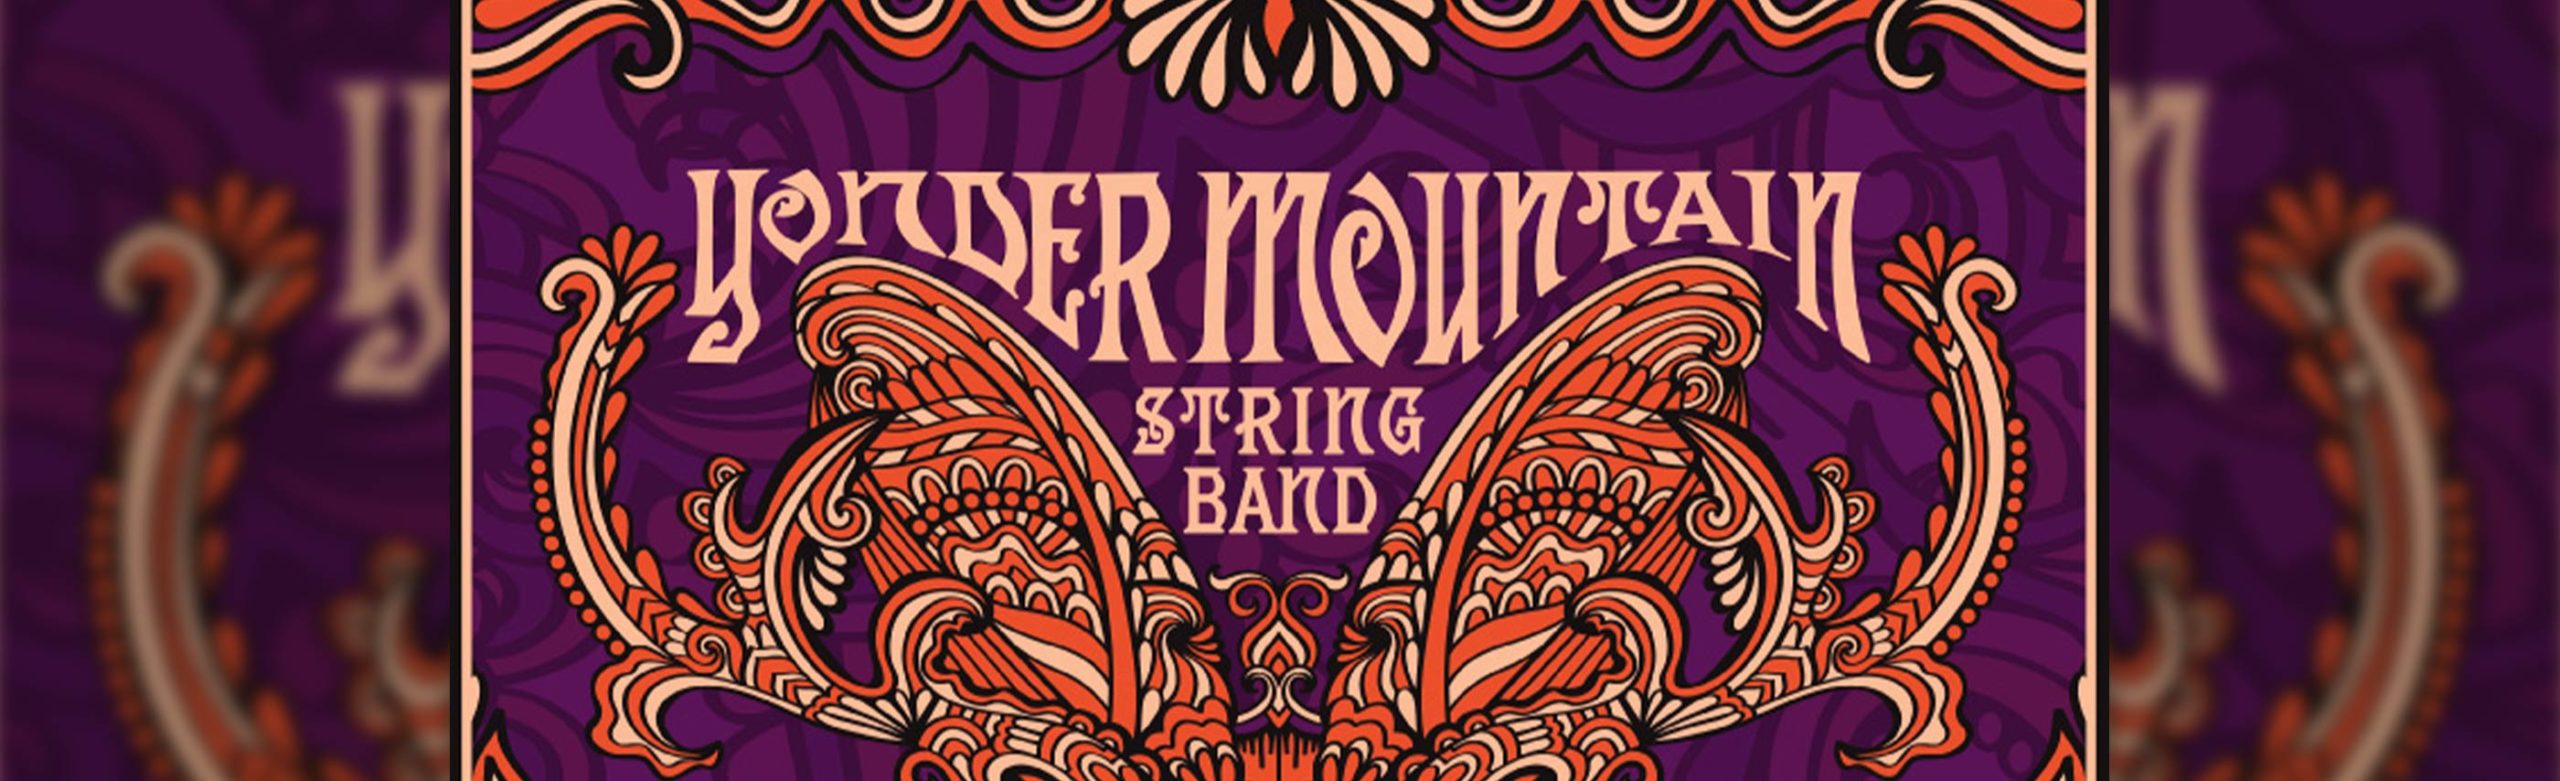 Yonder Mountain String Band Tickets + Poster Giveaway Image